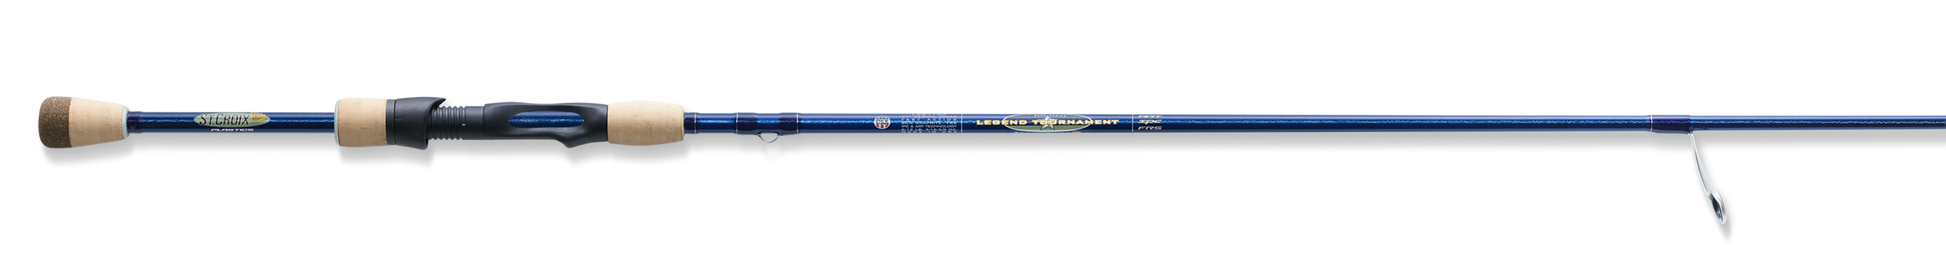 St. Croix Legend Tournament Bass Spinning Rods - Dogfish Tackle & Marine